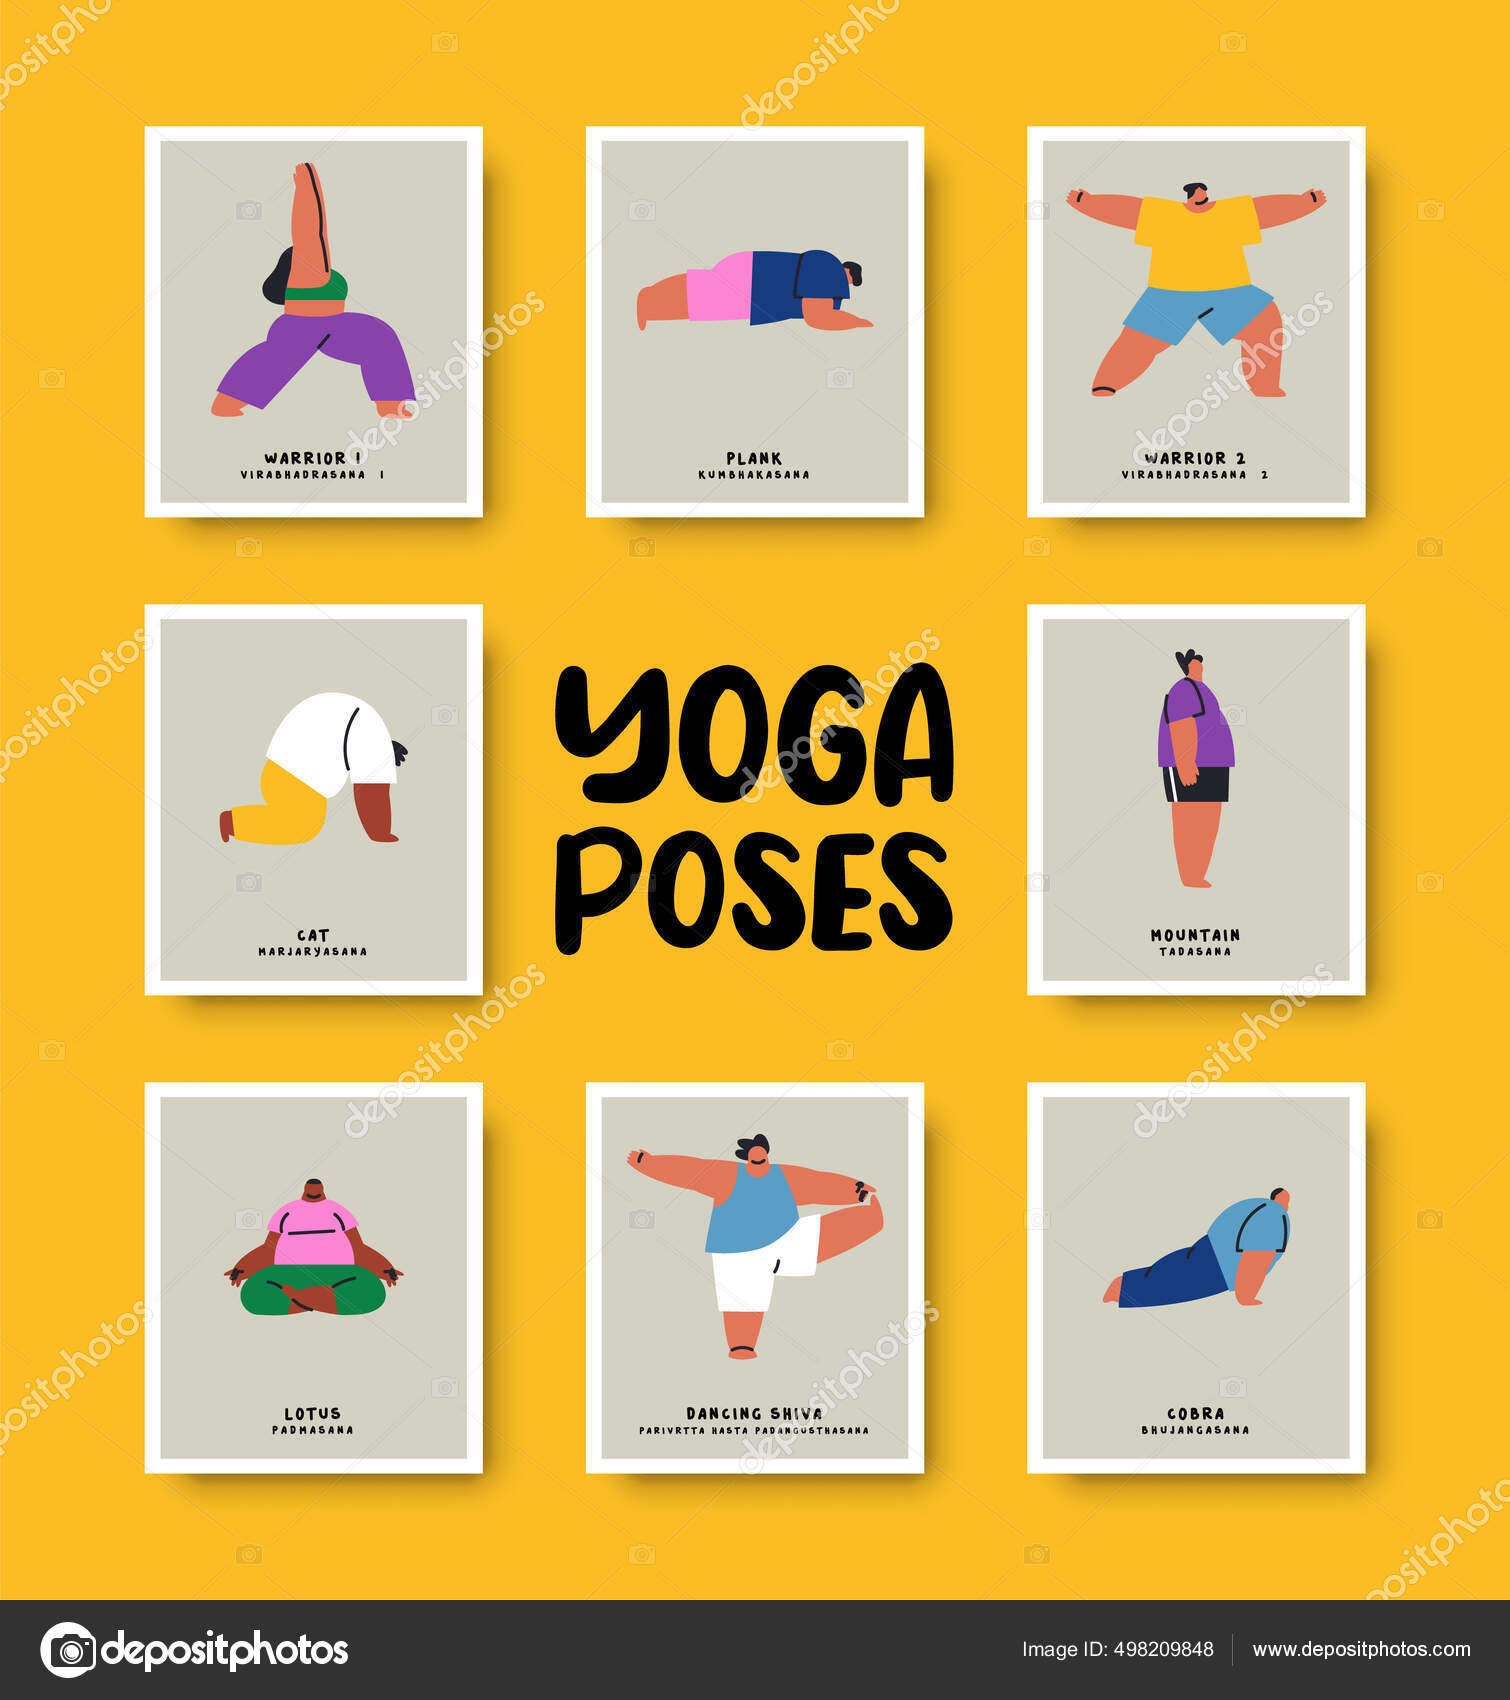 Buy 12 Yoga Poses With English and Sanskrit Names, Yoga Print, Yoga Asana  Poster, Yoga Sequence Online in India - Etsy